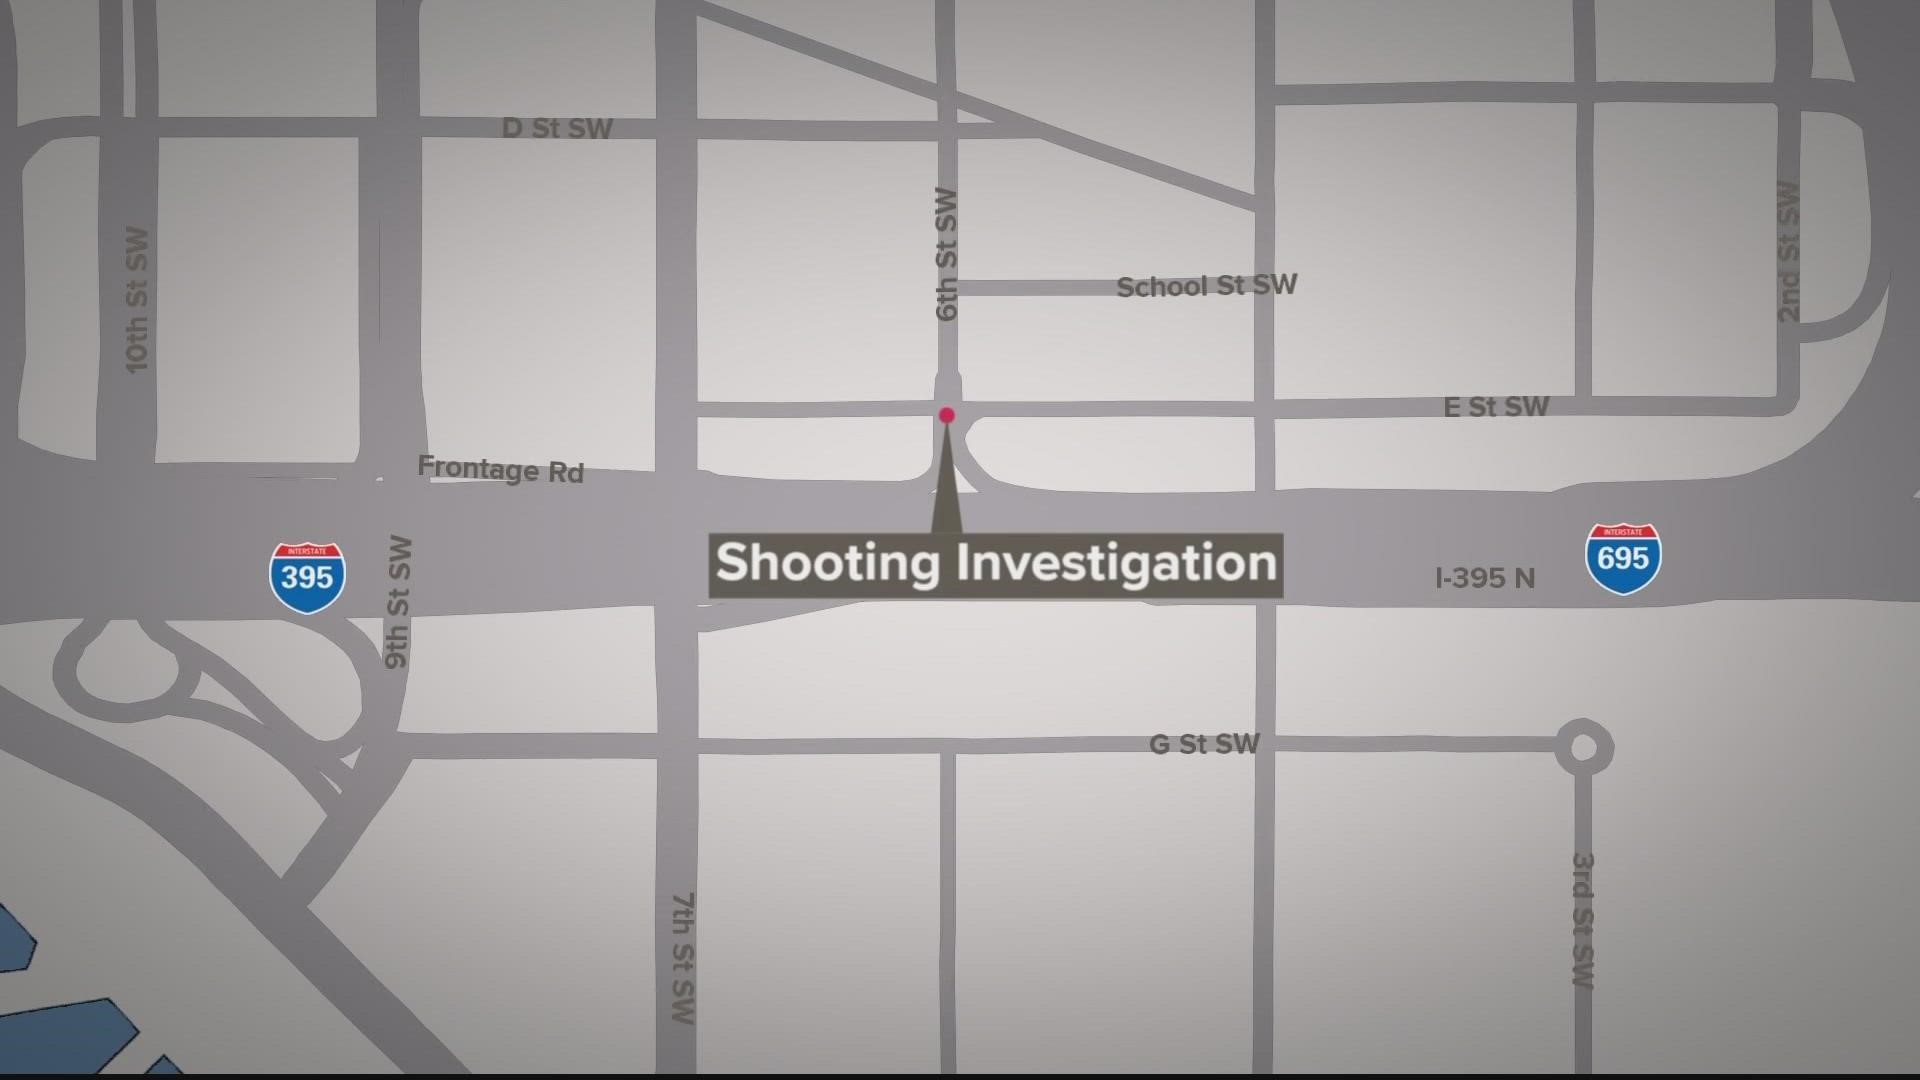 Police say a road rage incident led to the shooting.